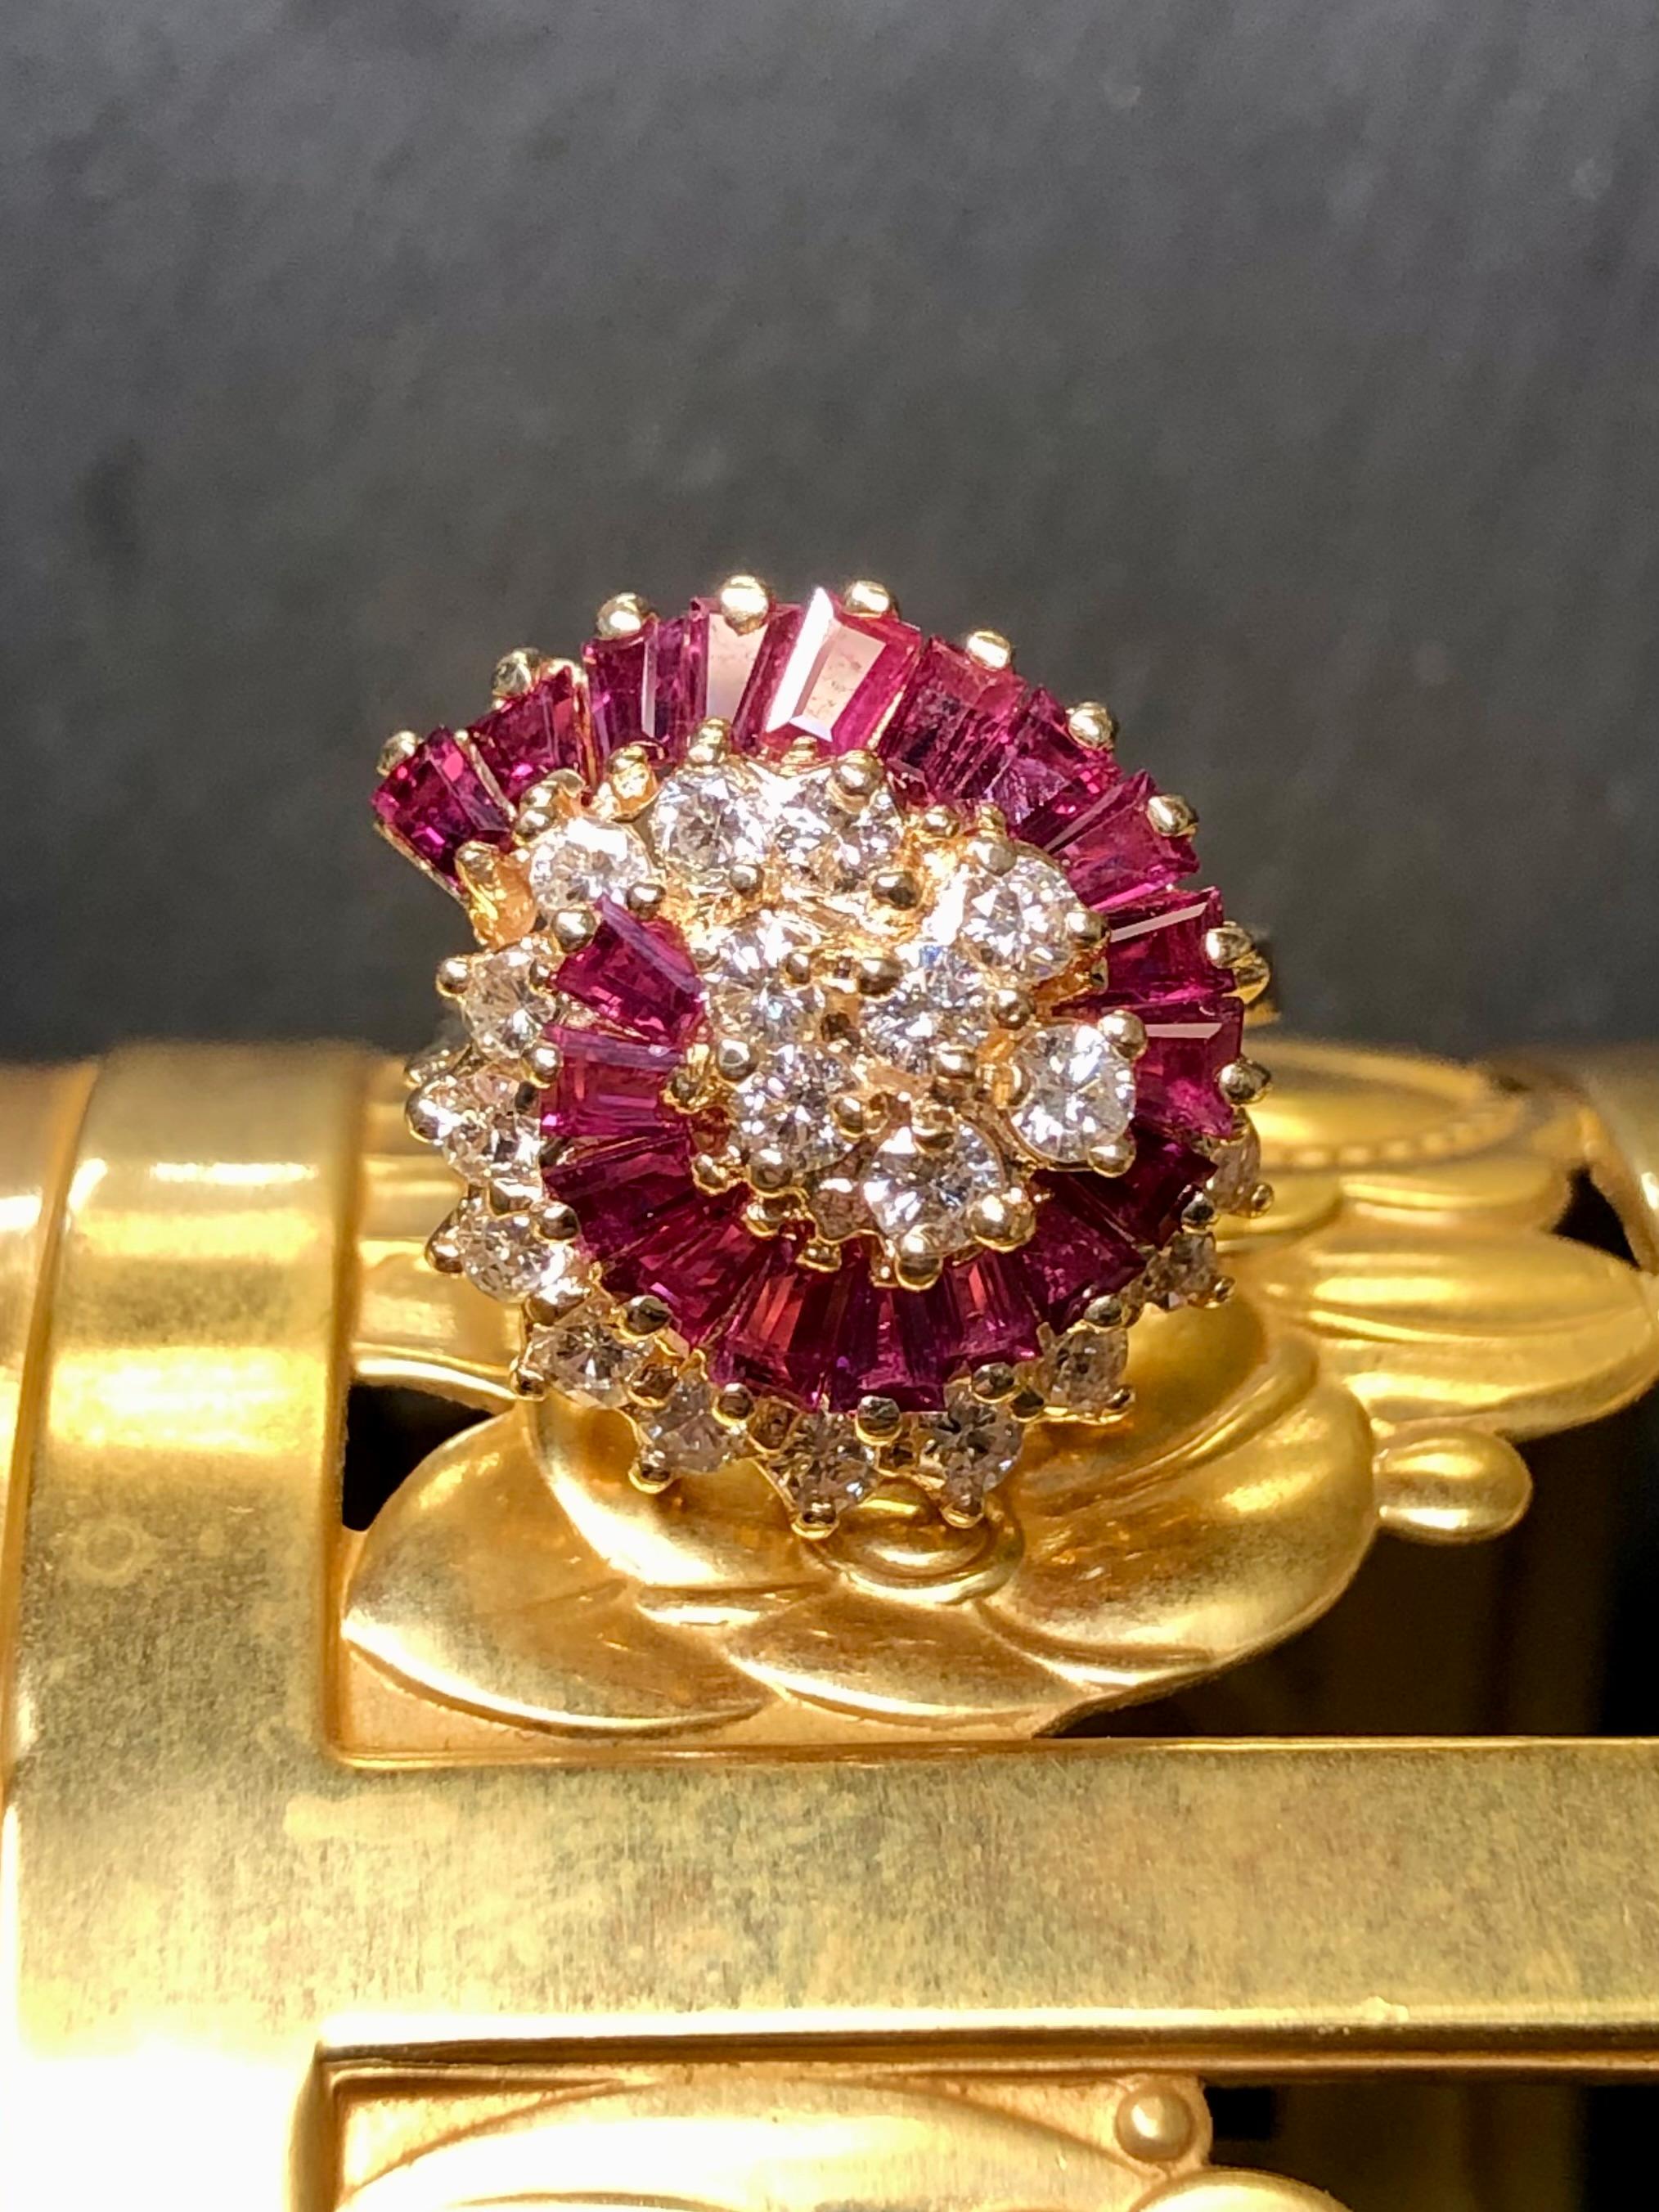 A gorgeous cocktail ring done in 14K yellow gold prong set with approximately 1.33cttw in F-G color Vs1 clarity round diamonds as well as 2.28cttw in gorgeously vibrant red natural tapered baguette rubies.


Dimensions/Weight:

Ring measures .75” in